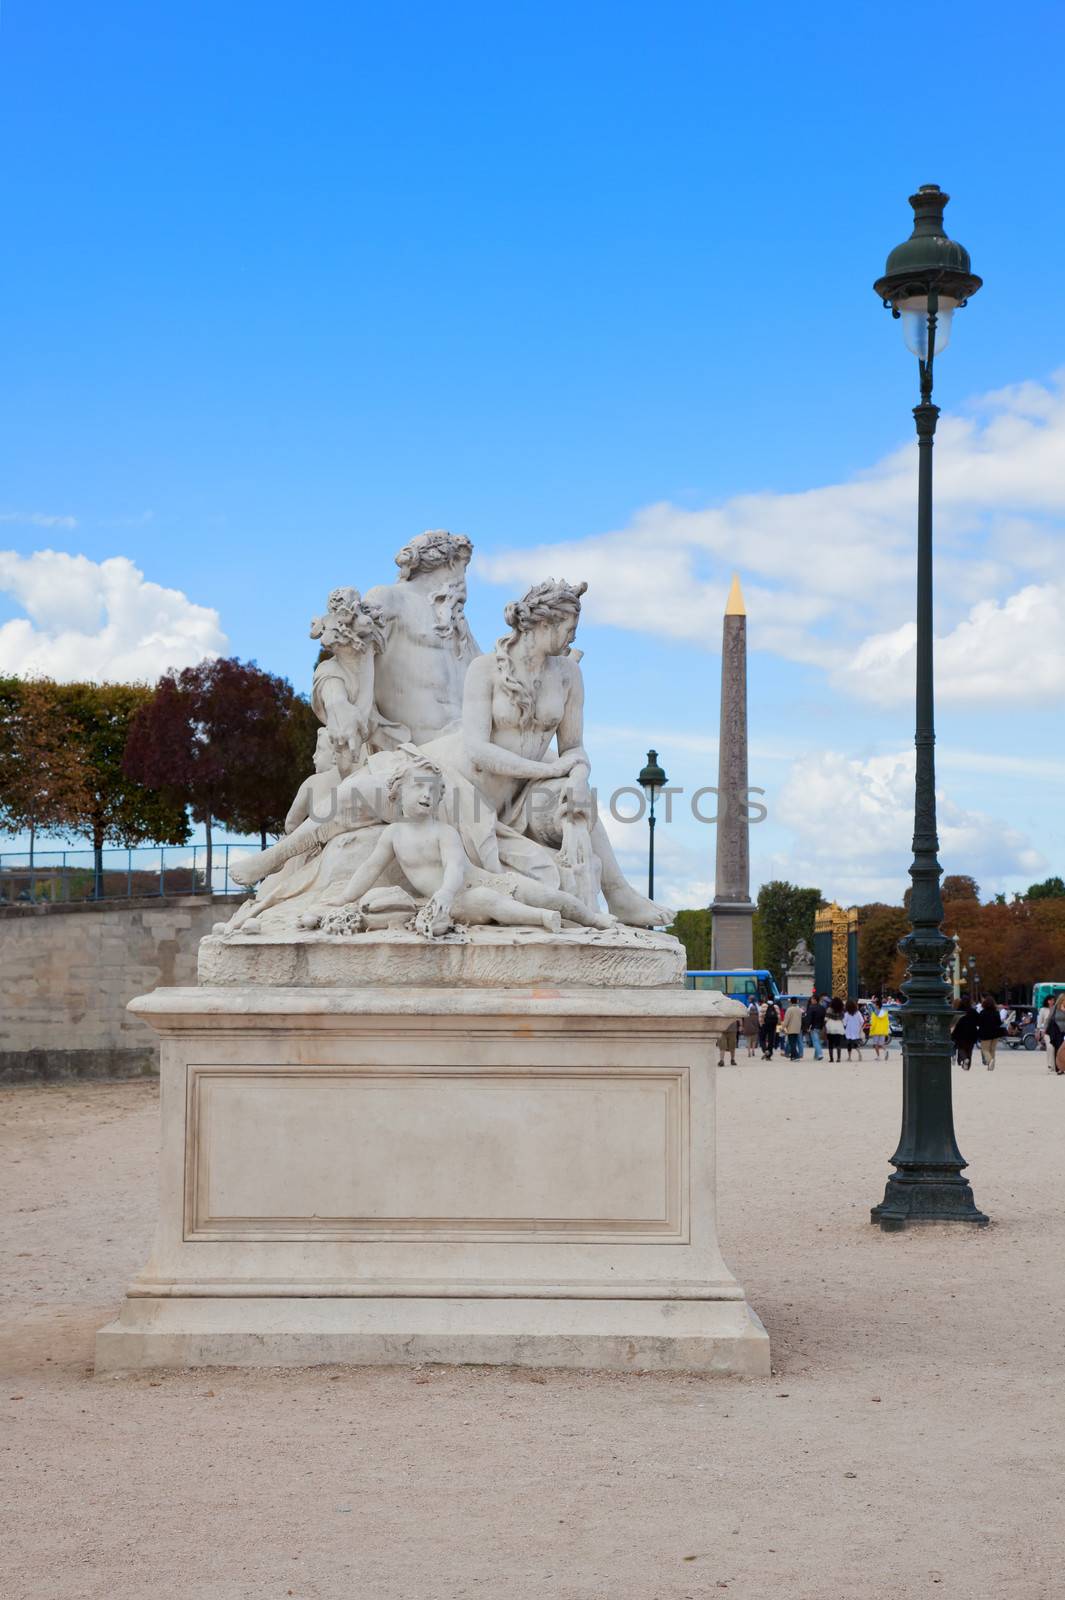 Paris - Statue from Tuileries garden near the Louvre by gary718